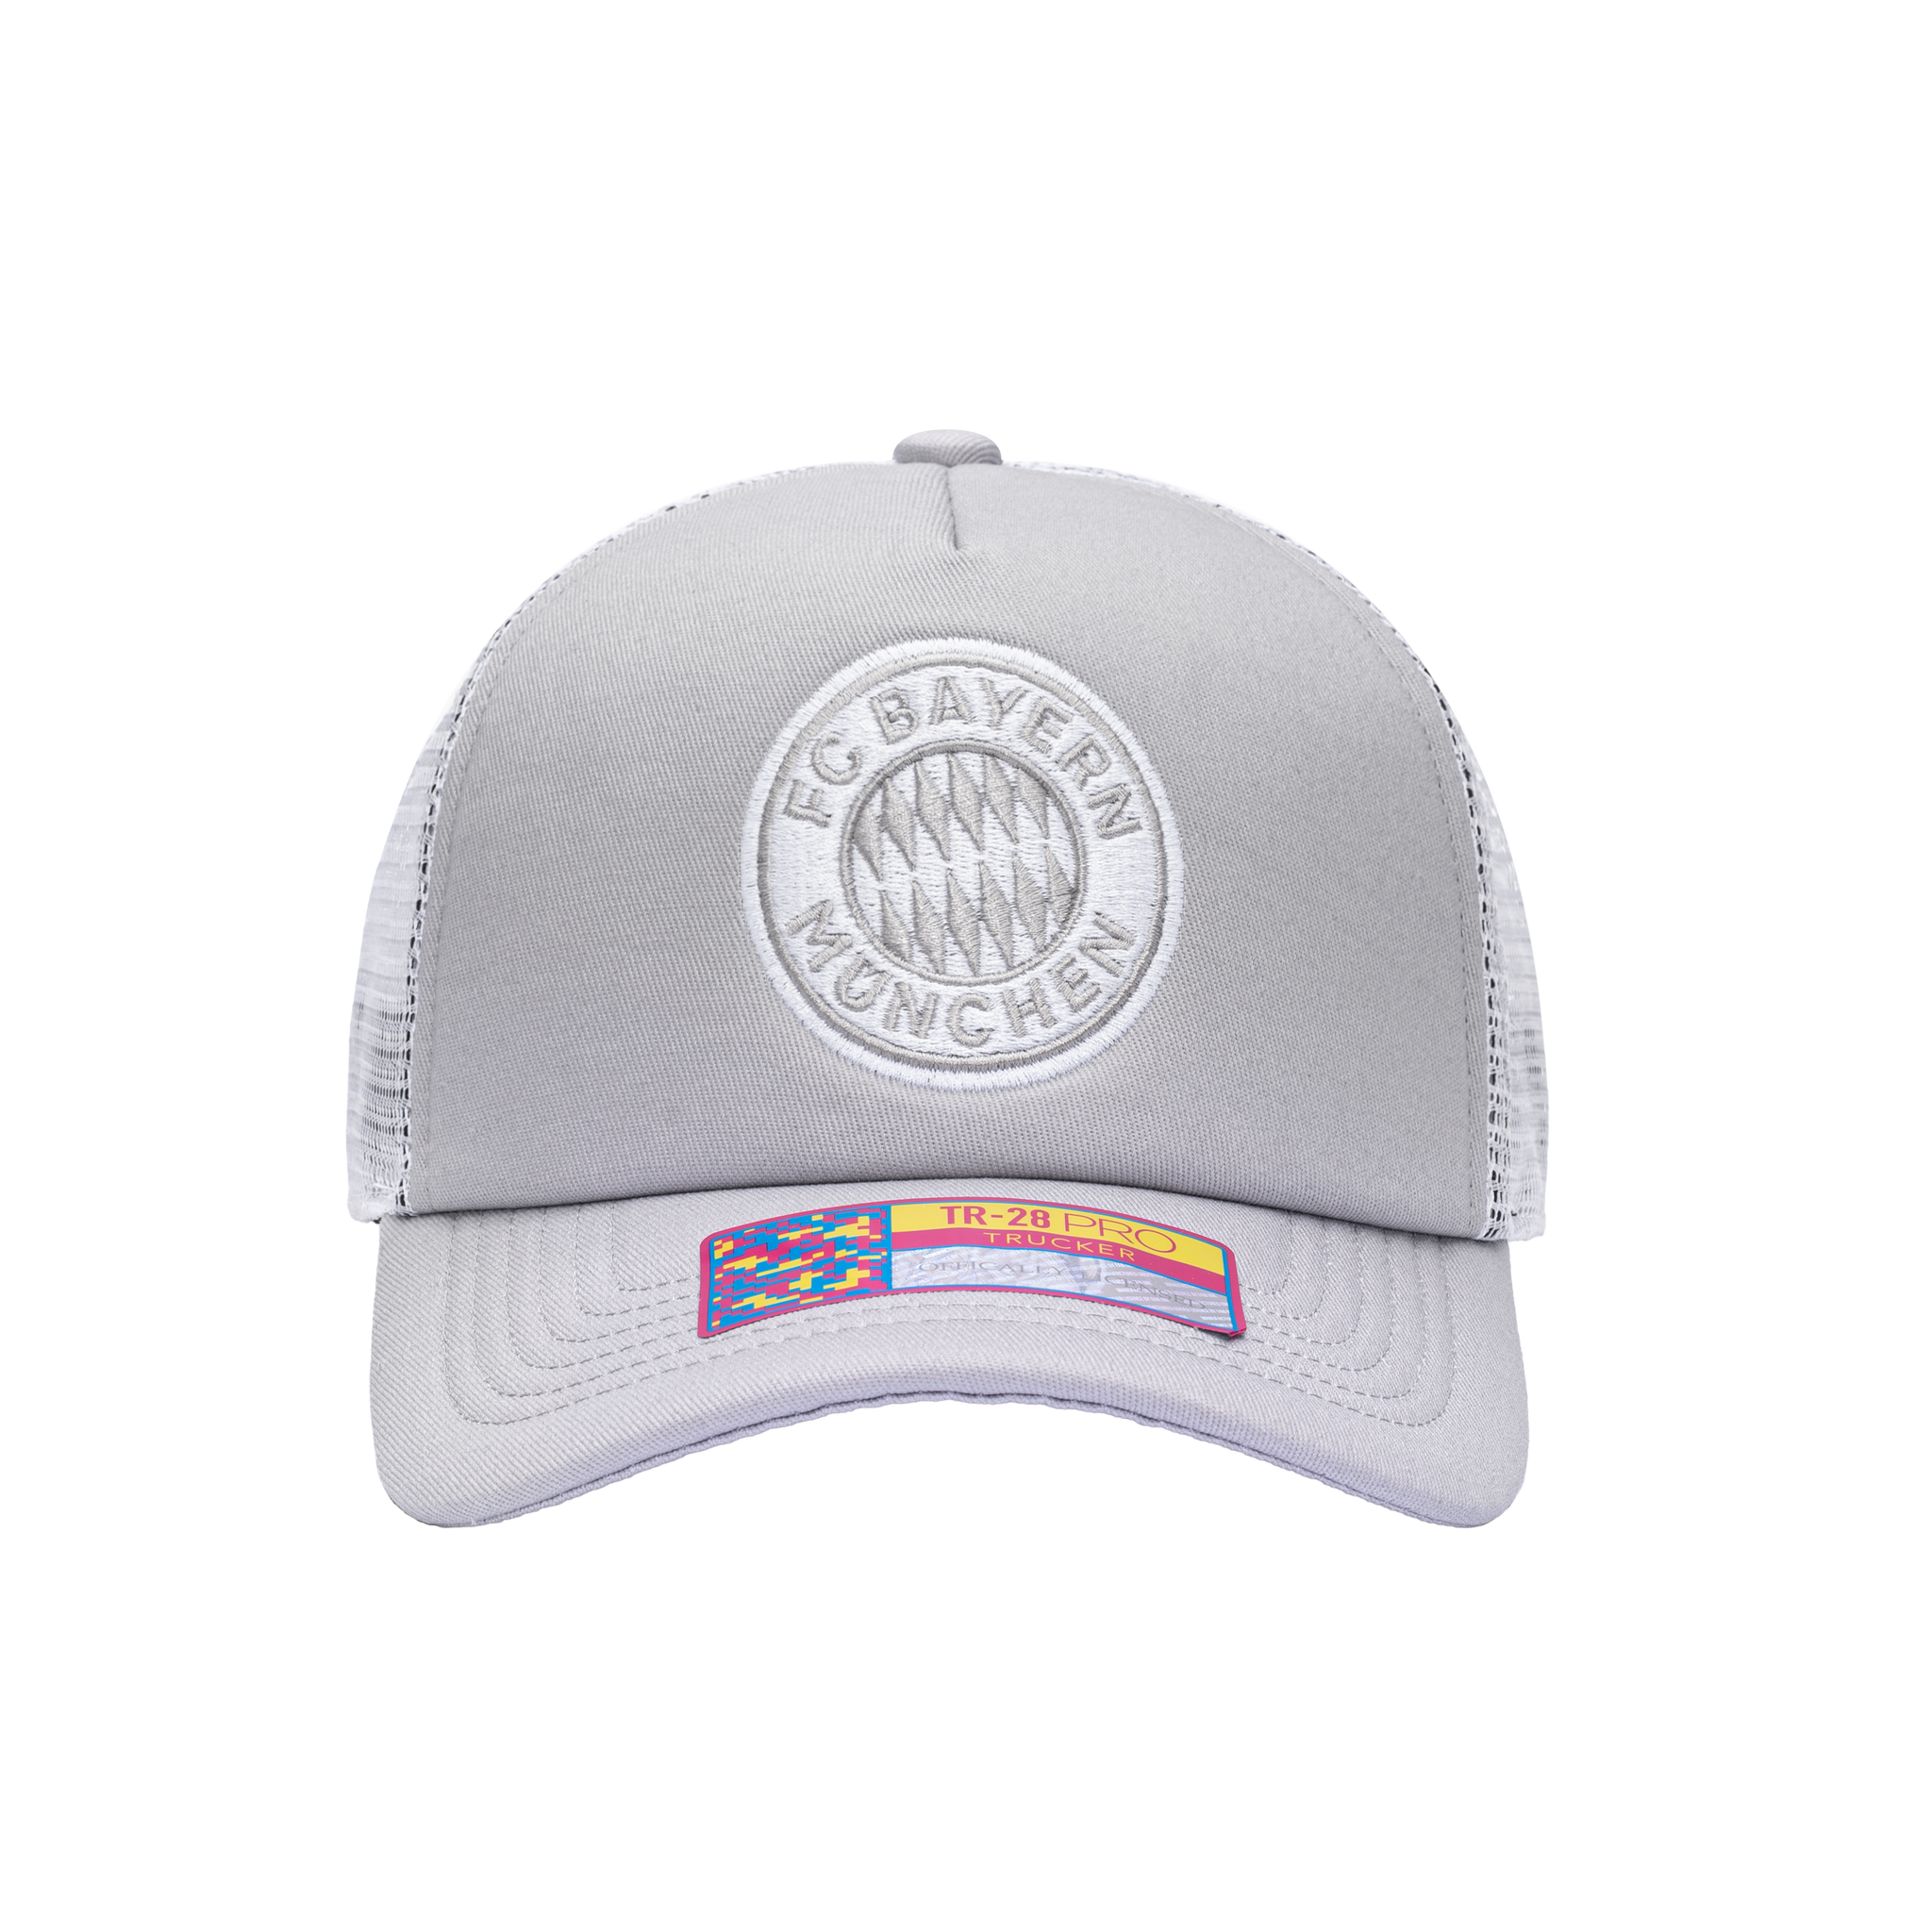 Front view of the Bayern Munich Fog Trucker Hat in Grey/White, with high crown, curved peak, mesh back and snapback closure.